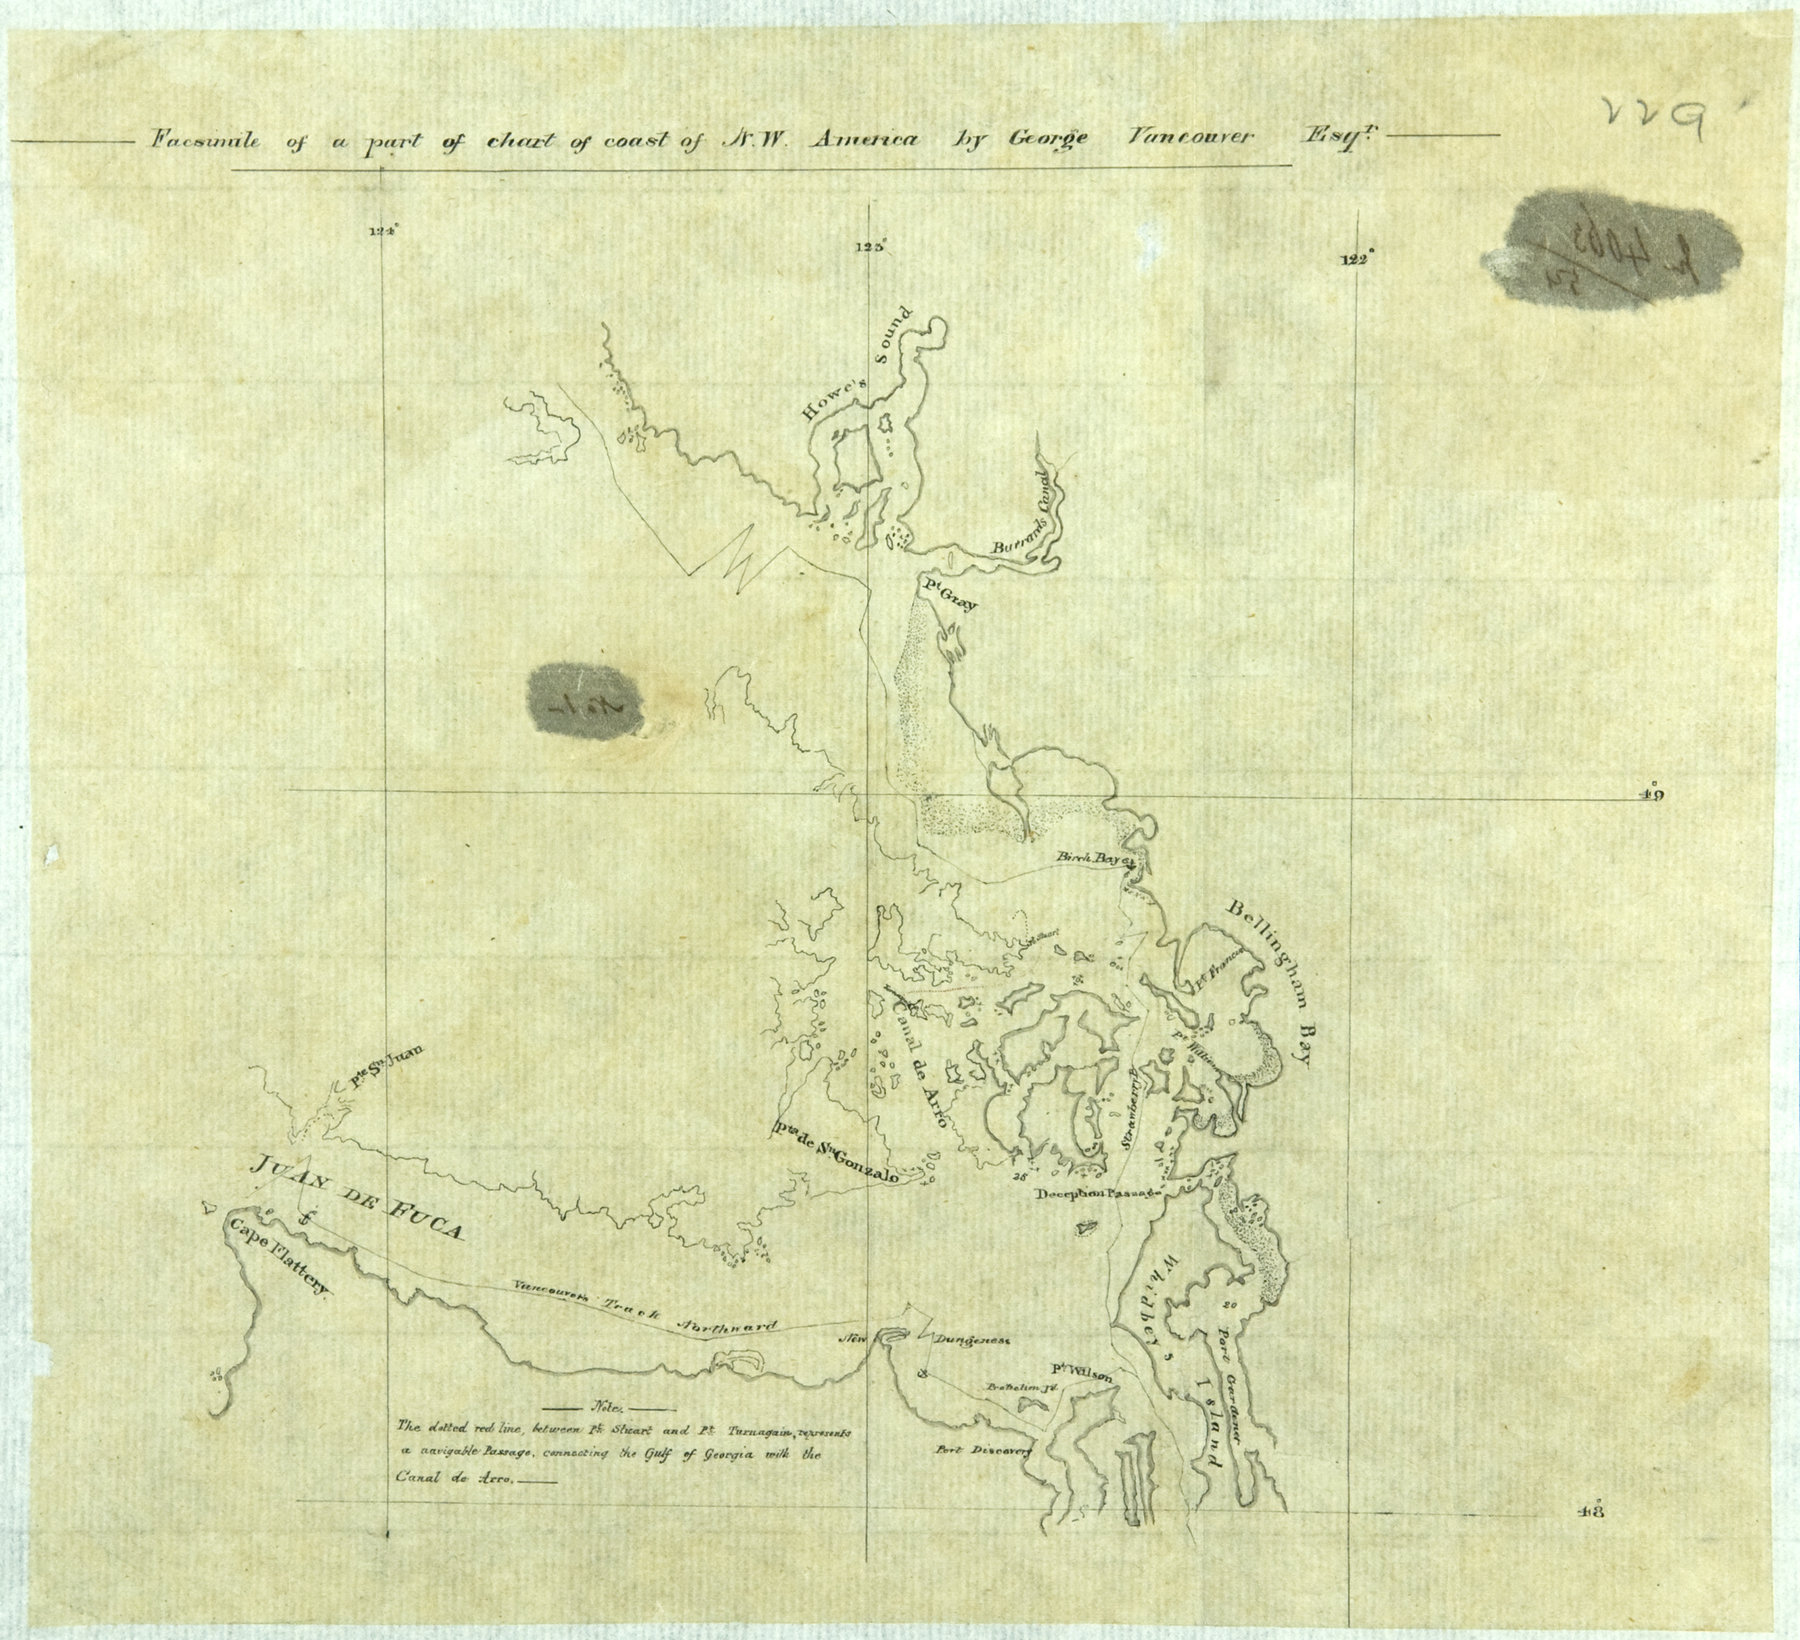 Facsimile of a part of chart of coast of N.W. America by George Vancouver Esqr'.